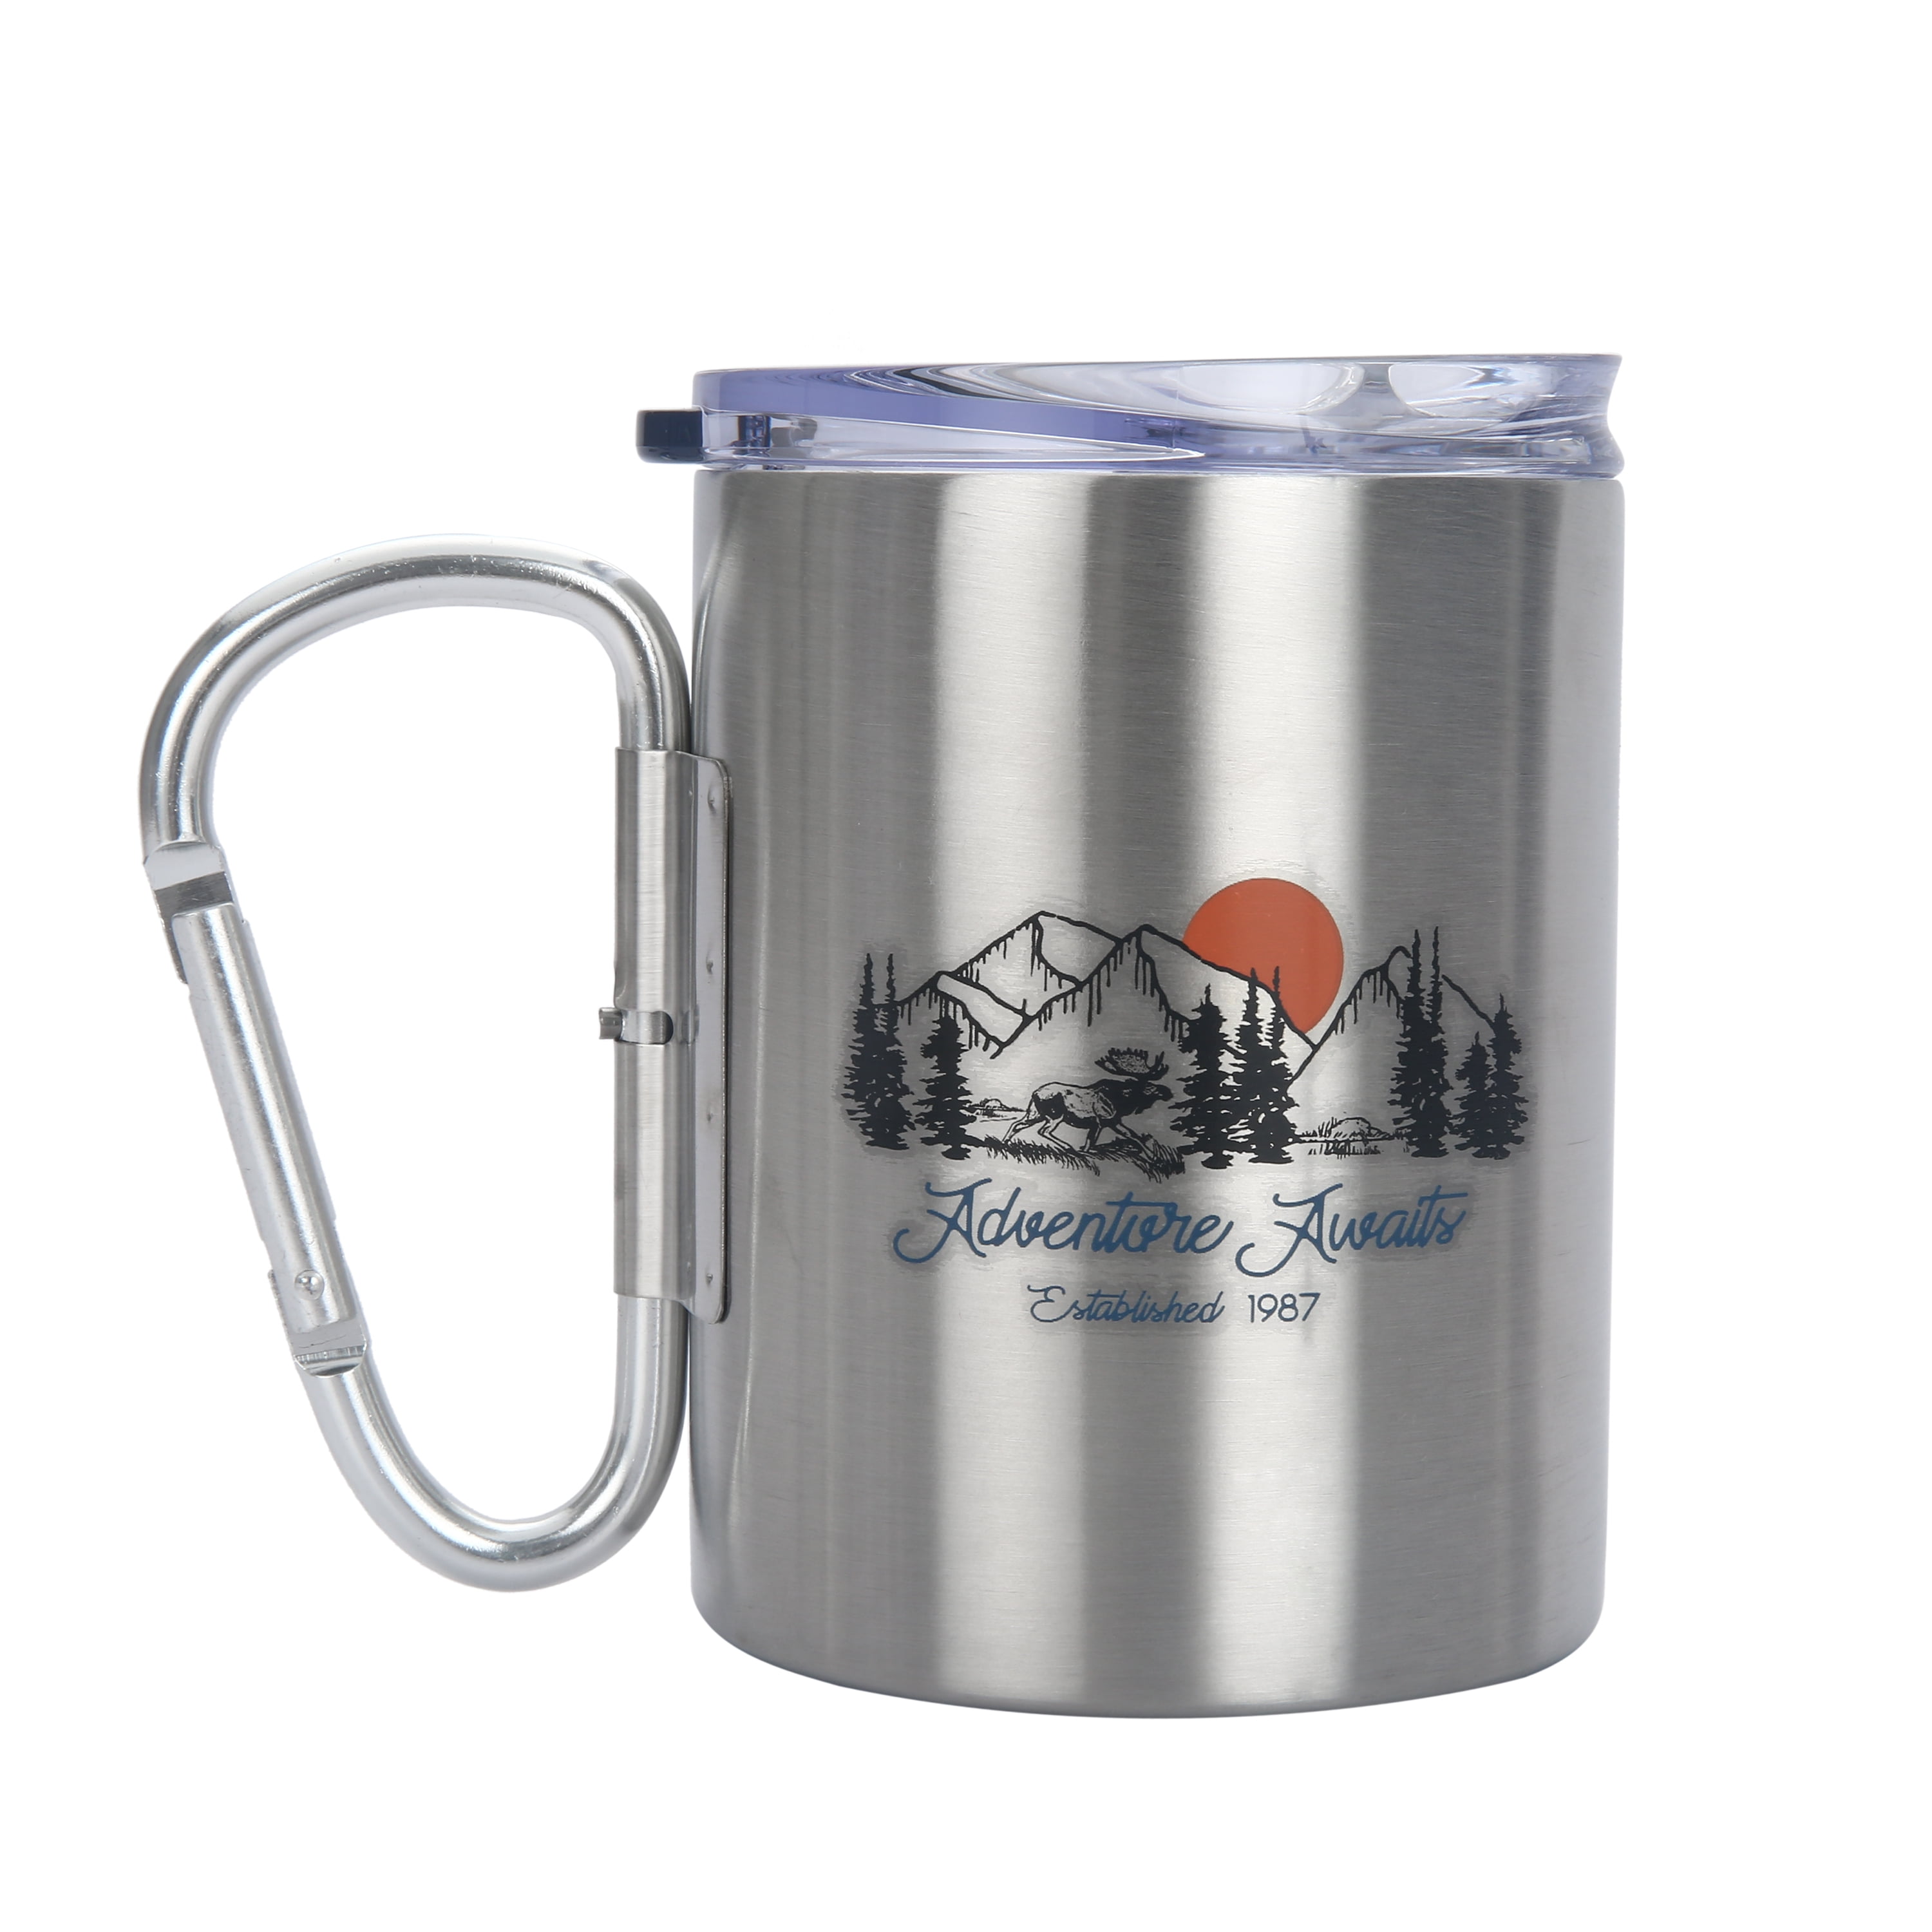 Stainless Steel Cup Camping Outdoor Cup Mug With Carabiner Hook Handle-~YRSN